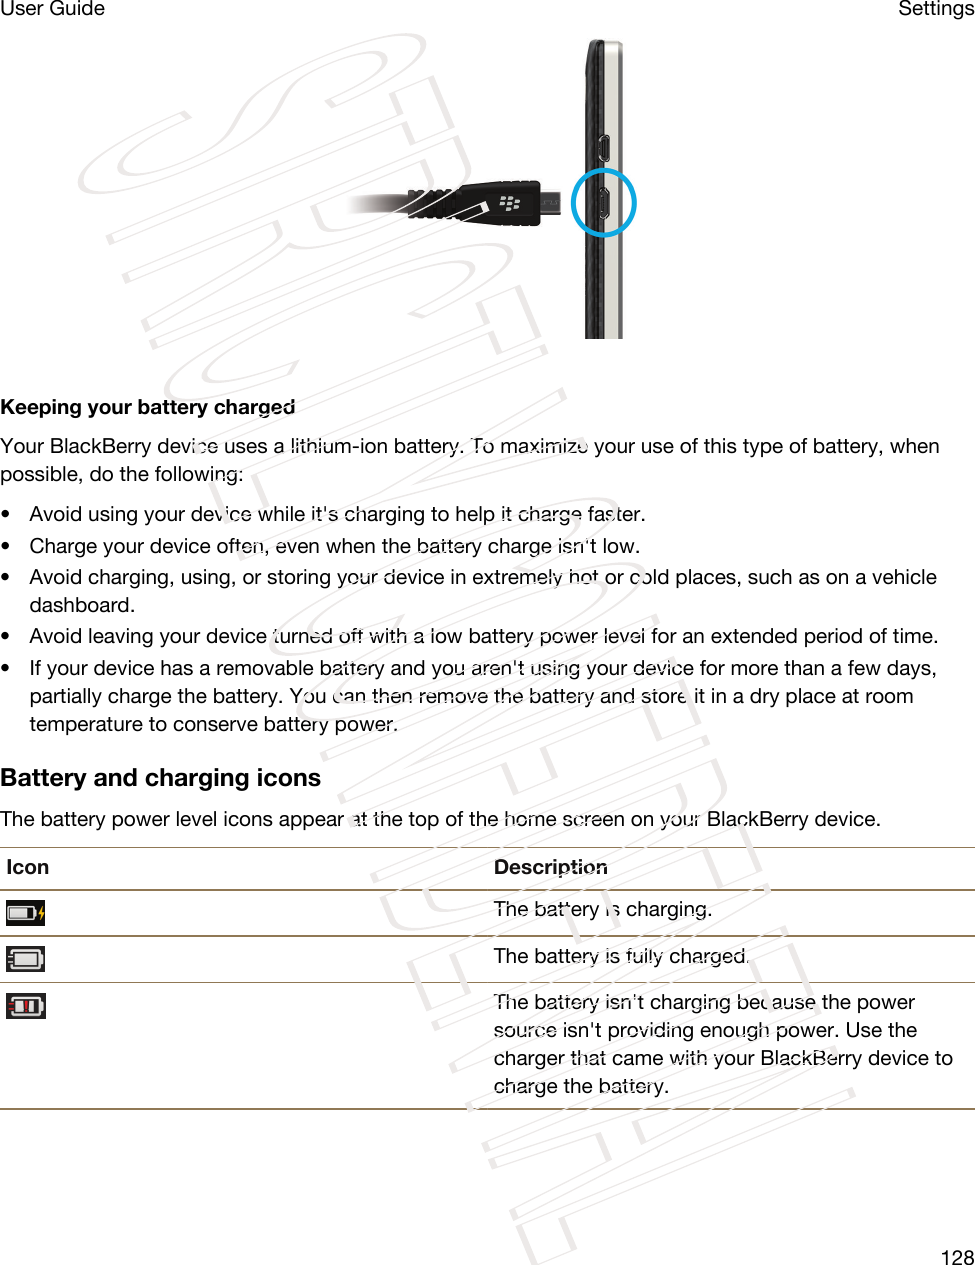  Keeping your battery chargedYour BlackBerry device uses a lithium-ion battery. To maximize your use of this type of battery, when possible, do the following:• Avoid using your device while it&apos;s charging to help it charge faster.• Charge your device often, even when the battery charge isn&apos;t low.• Avoid charging, using, or storing your device in extremely hot or cold places, such as on a vehicle dashboard.• Avoid leaving your device turned off with a low battery power level for an extended period of time.• If your device has a removable battery and you aren&apos;t using your device for more than a few days, partially charge the battery. You can then remove the battery and store it in a dry place at room temperature to conserve battery power.Battery and charging iconsThe battery power level icons appear at the top of the home screen on your BlackBerry device.Icon DescriptionThe battery is charging.The battery is fully charged.The battery isn&apos;t charging because the power source isn&apos;t providing enough power. Use the charger that came with your BlackBerry device to charge the battery.SettingsUser Guide128STRICTLY CONFIDENTIAL